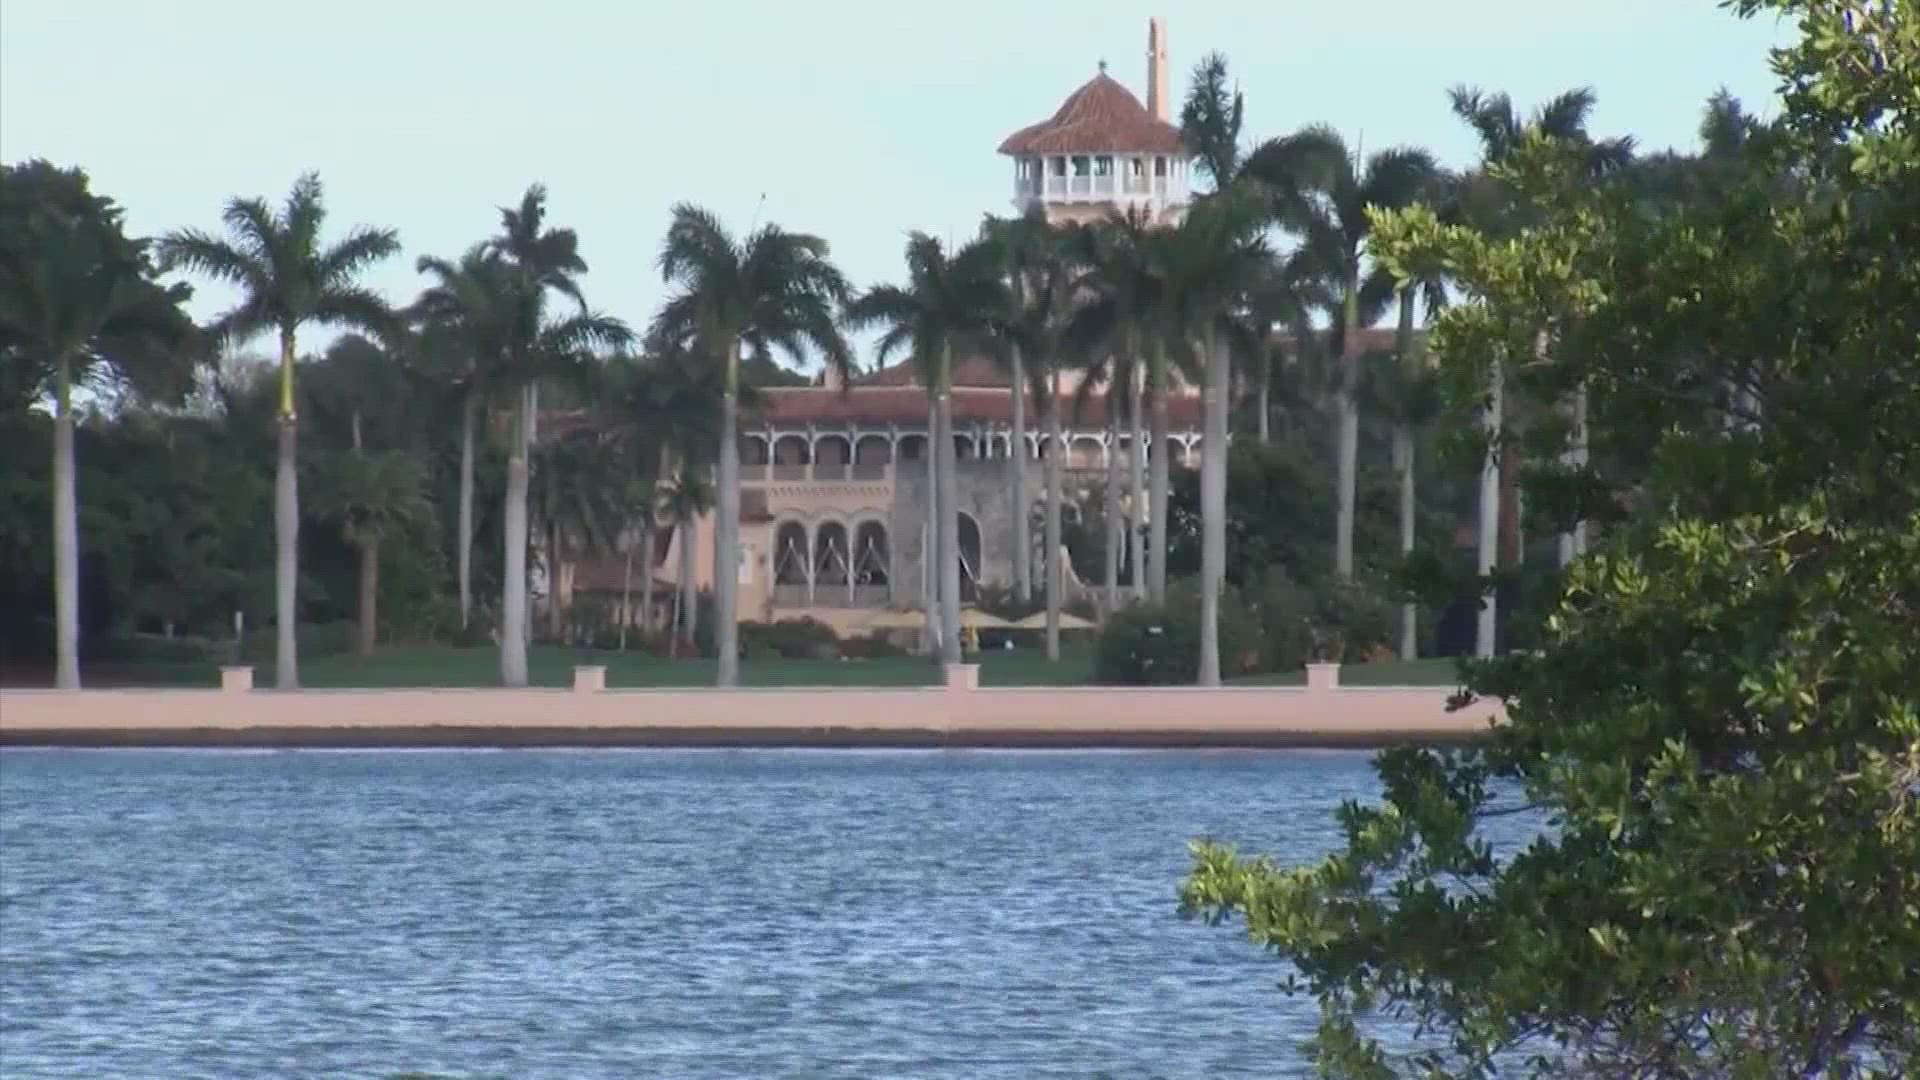 The Justice Department has been investigating the discovery of boxes of records containing classified information that were taken to Mar-a-Lago.